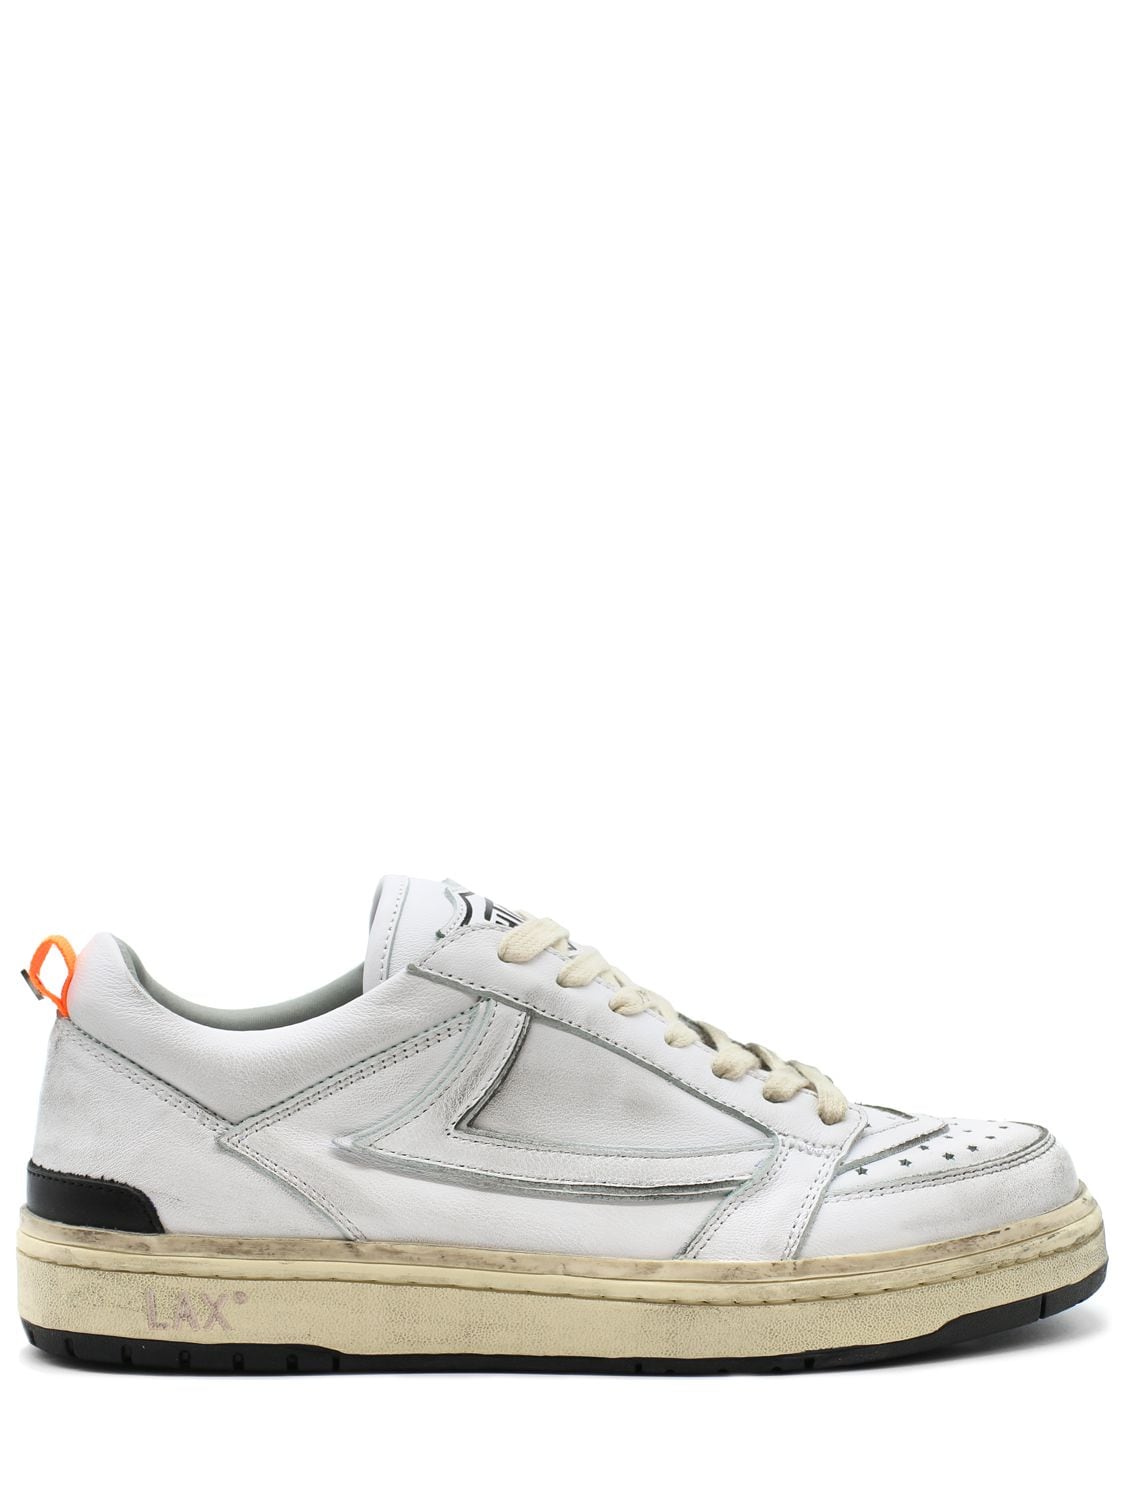 Htc Los Angeles Starlight Leather Low Top Sneakers In White